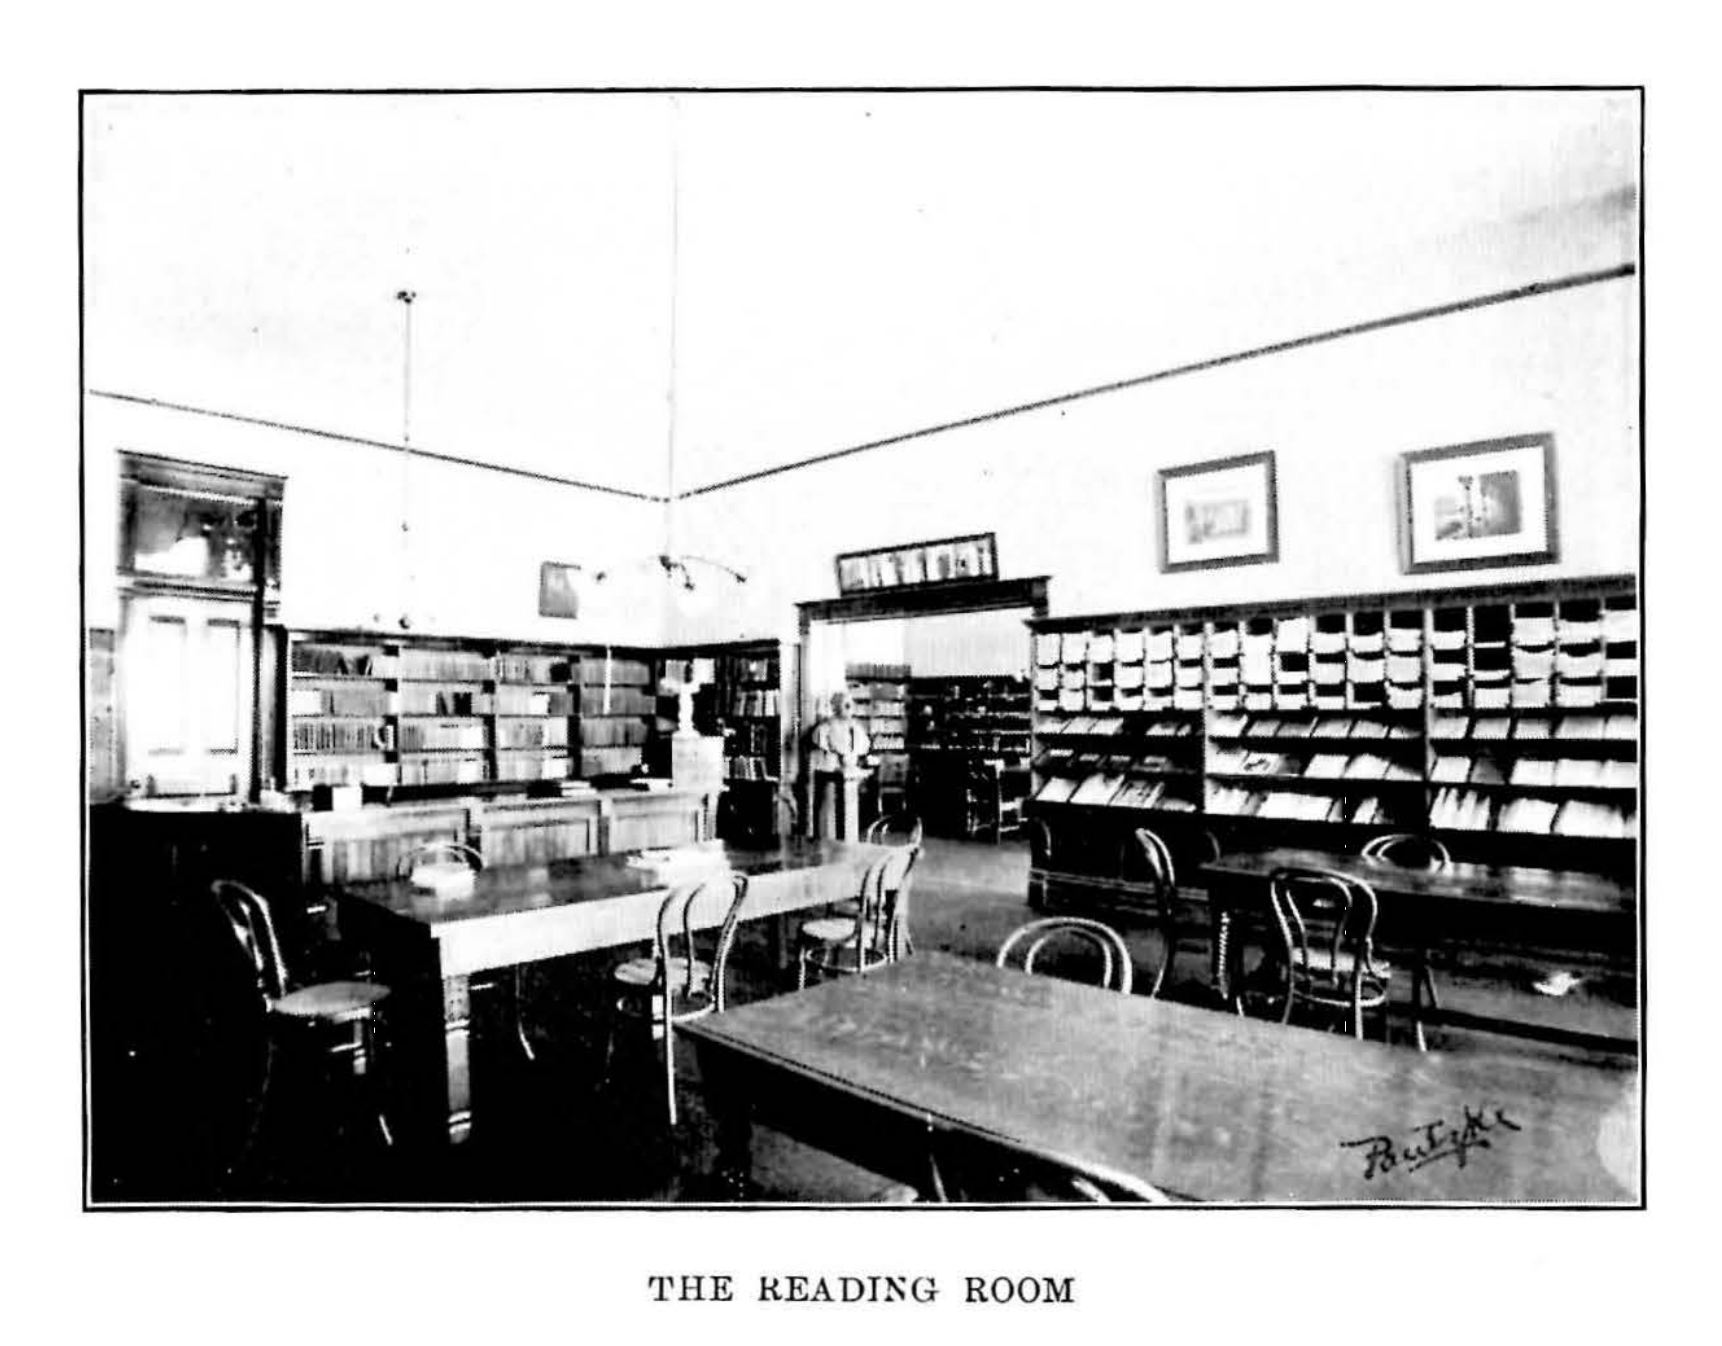 An image of a reading room in the library at CWU in 1903 from the 1903-04 CWU Catalogue. There are two large tables in the room and book shelves on several walls in the room.